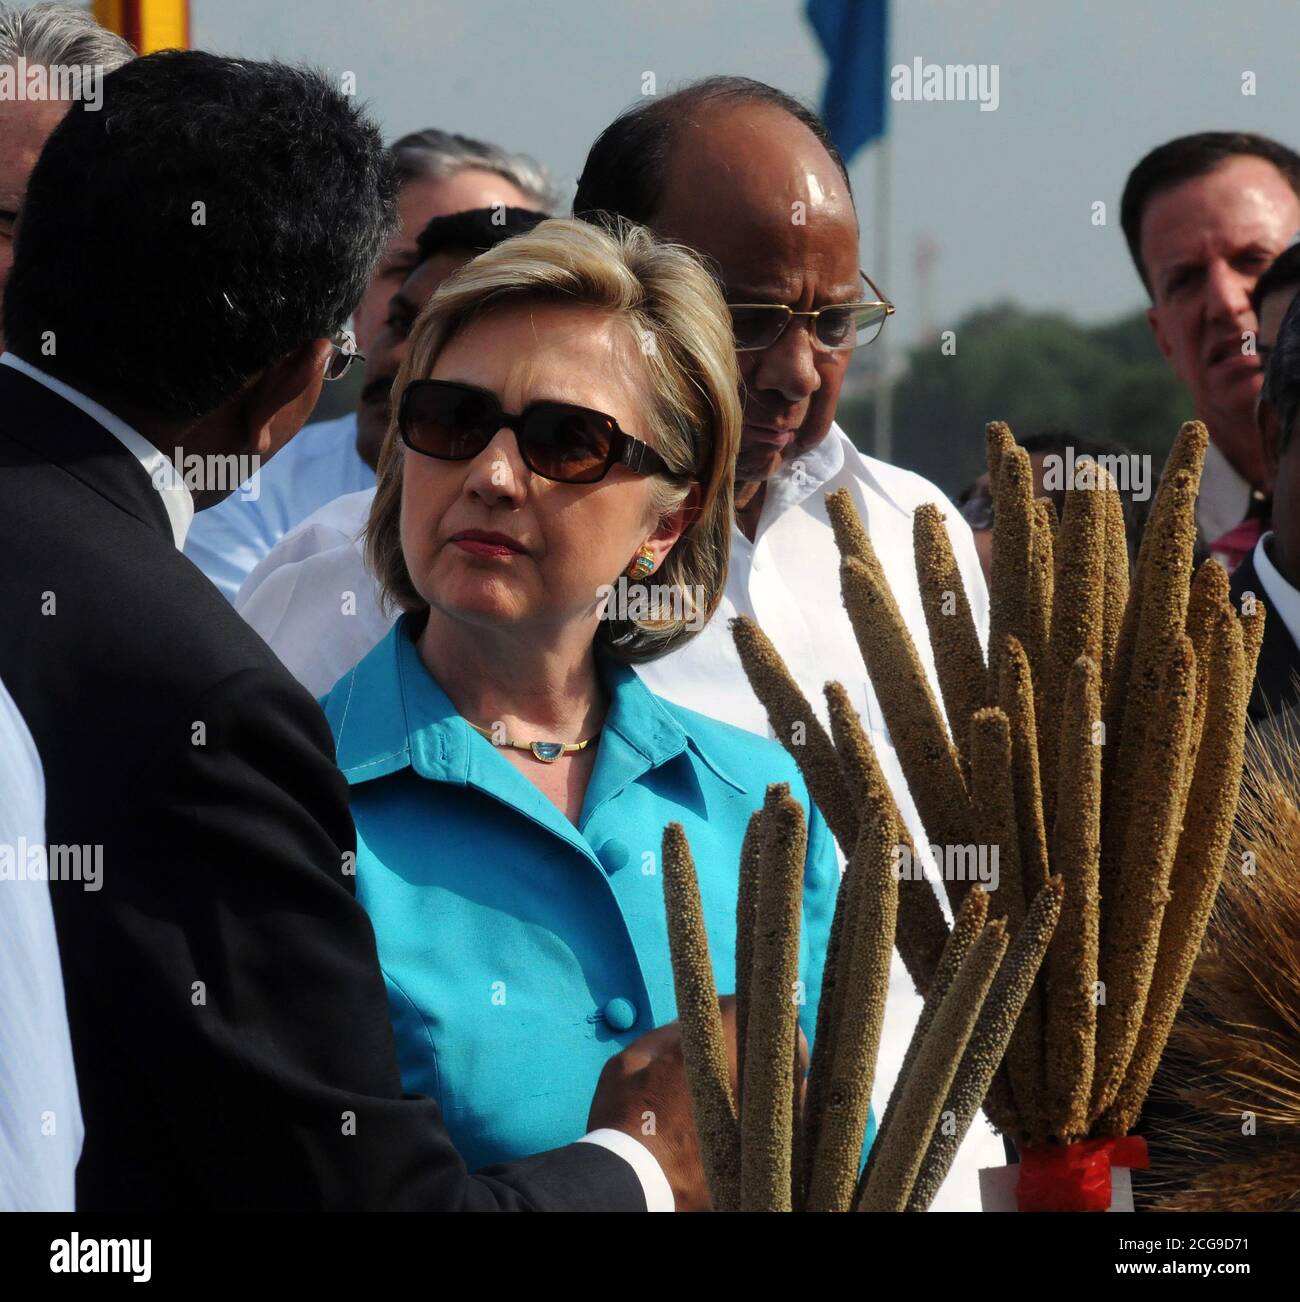 2009 - U.S. Secretary of State Hillary Rodham Clinton, Sharad Pawar, Minister of Agriculture, Consumer Affairs, Food and Public Distribution, and Dr. Mangala Rai, President of the National Academy of Agricultural Sciences, examine wheat samples Stock Photo